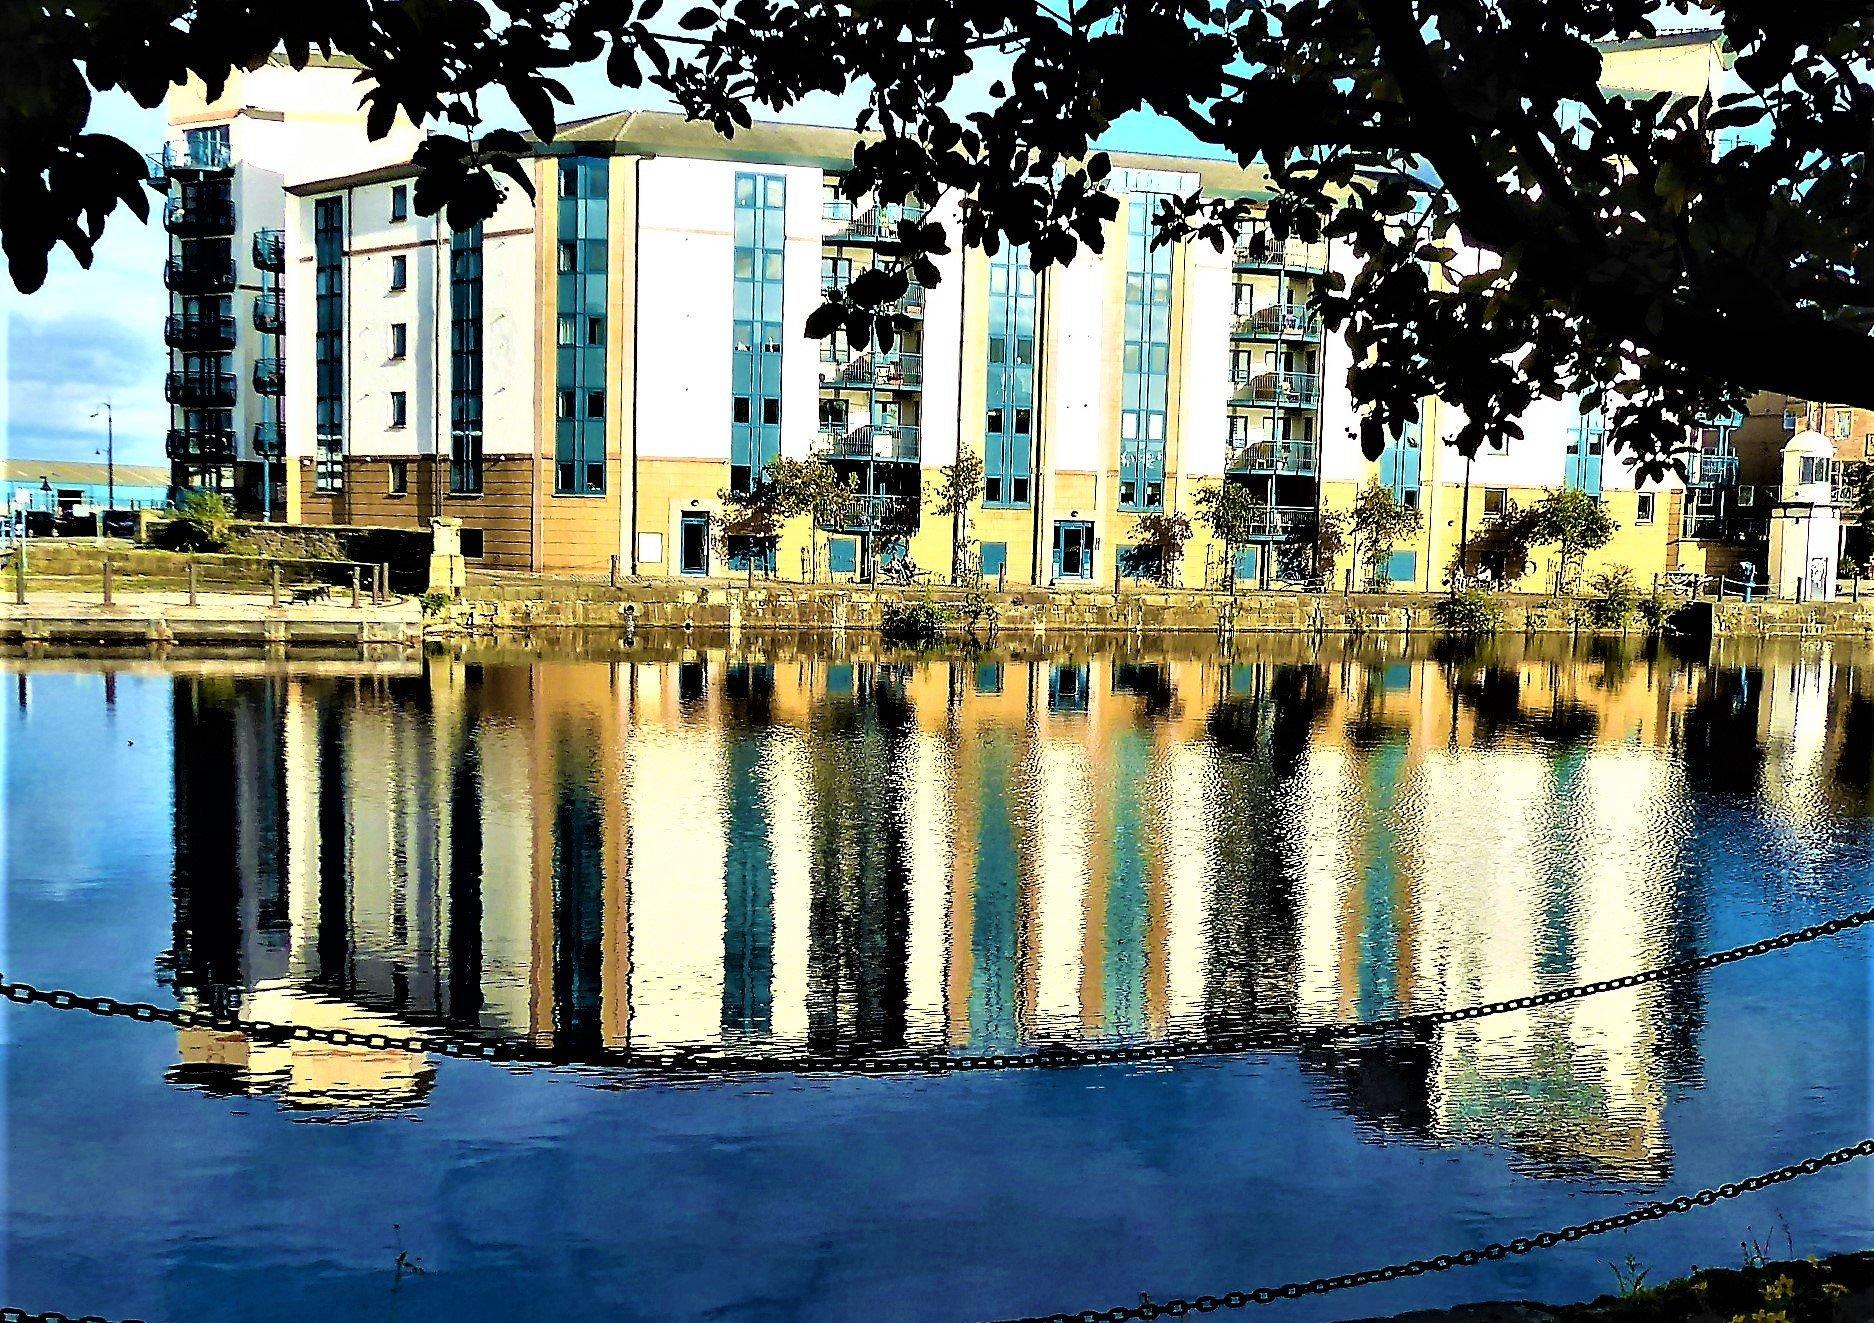 Reflections on the Shore at Leith, by  Tor Södergren